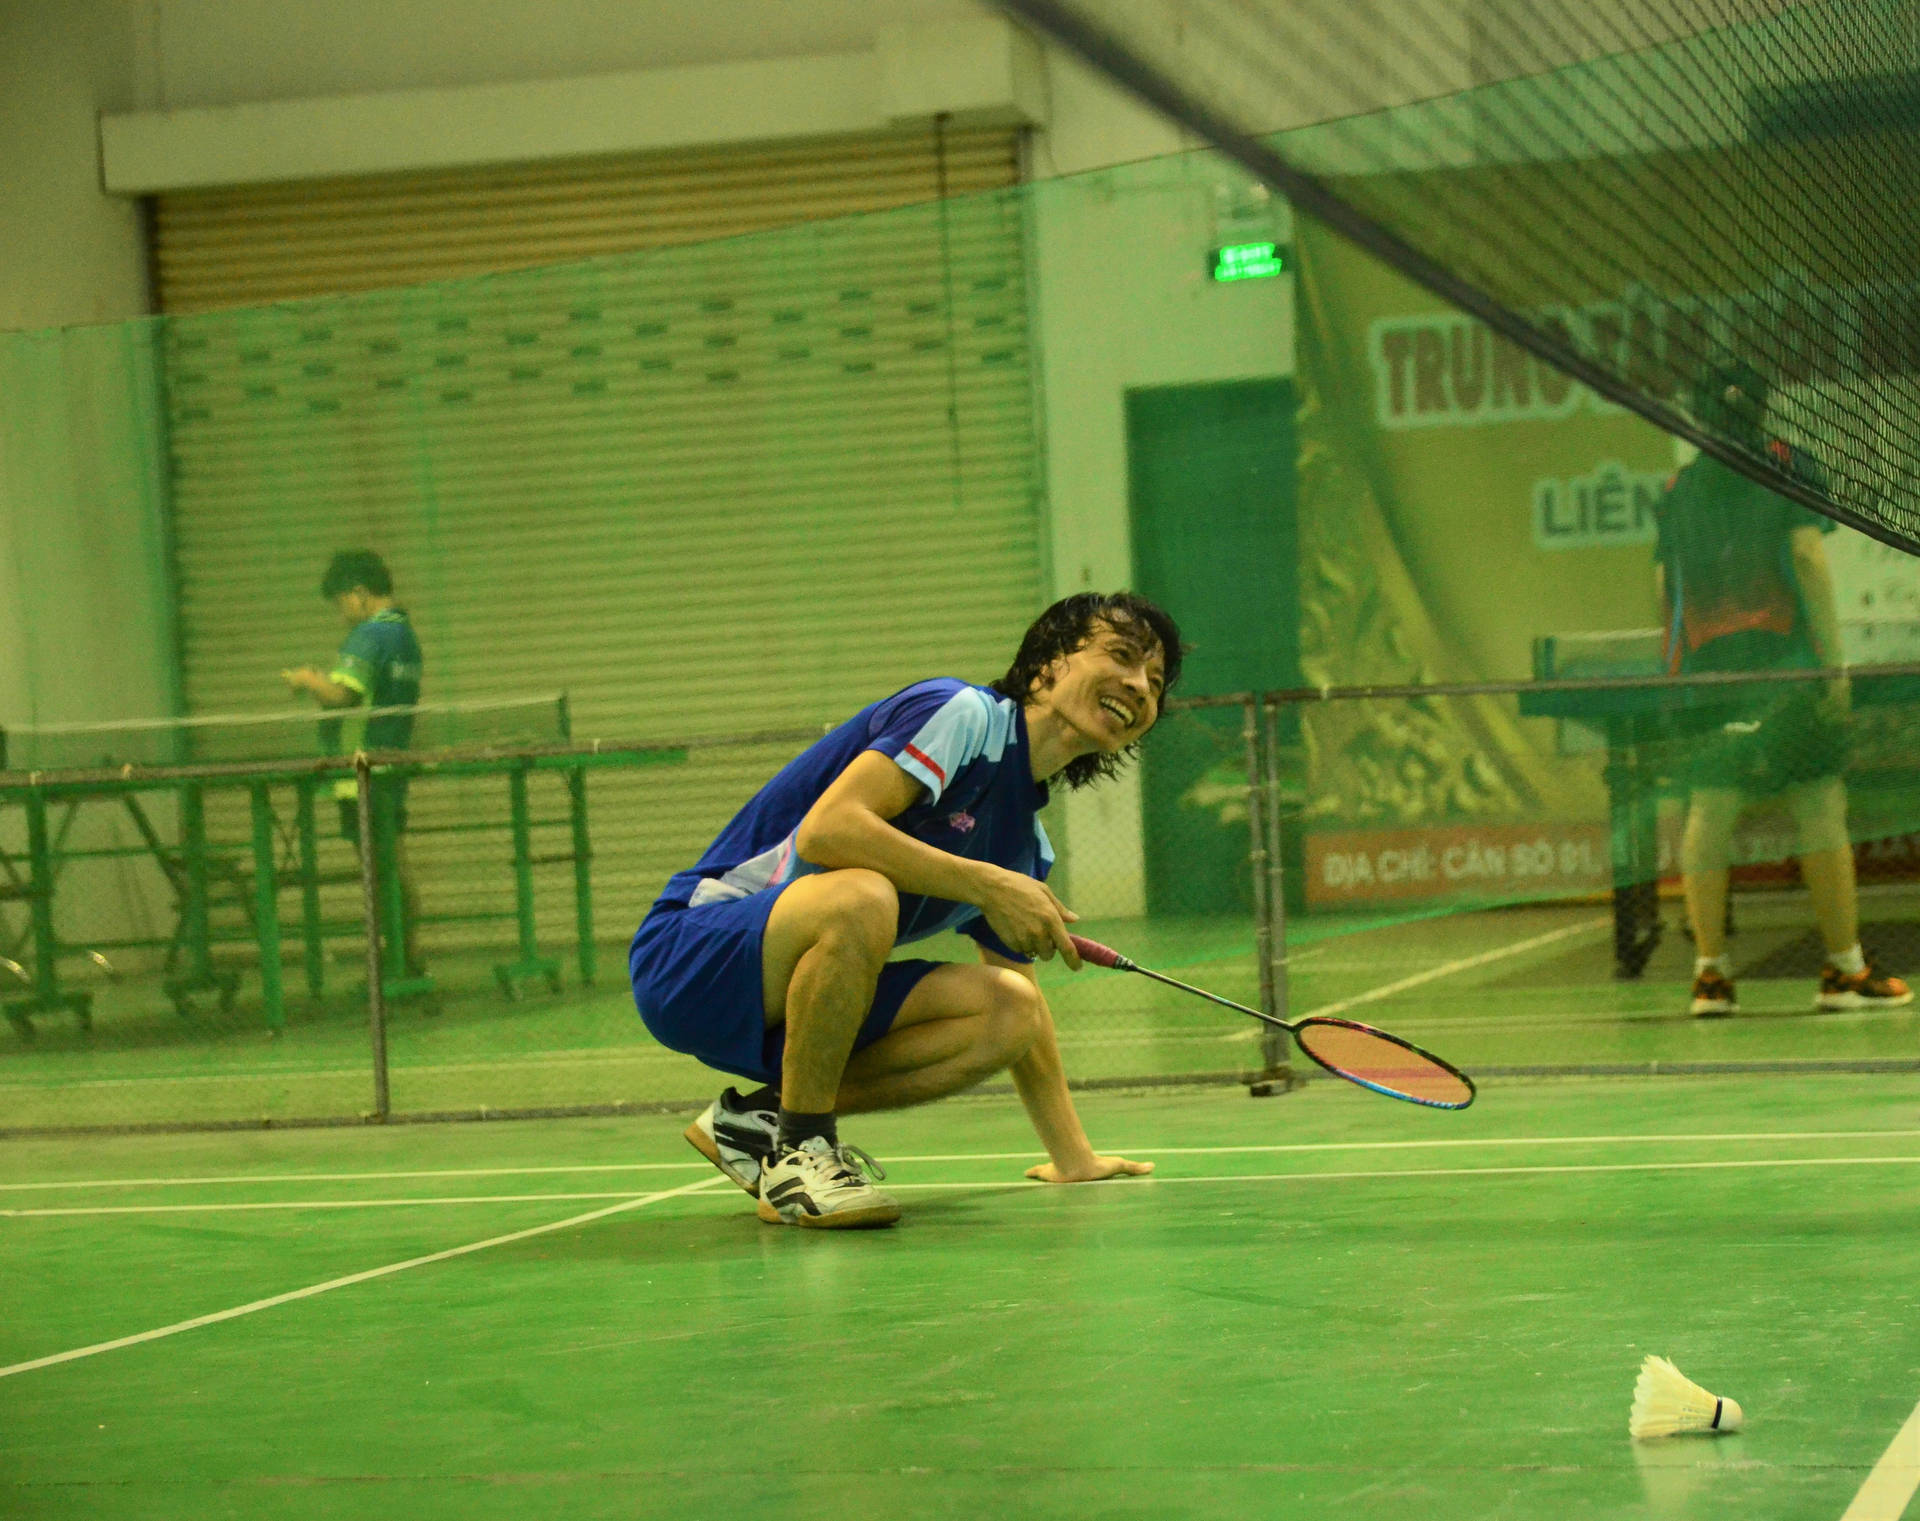 Badminton 4118X3263 Wallpaper and Background Image